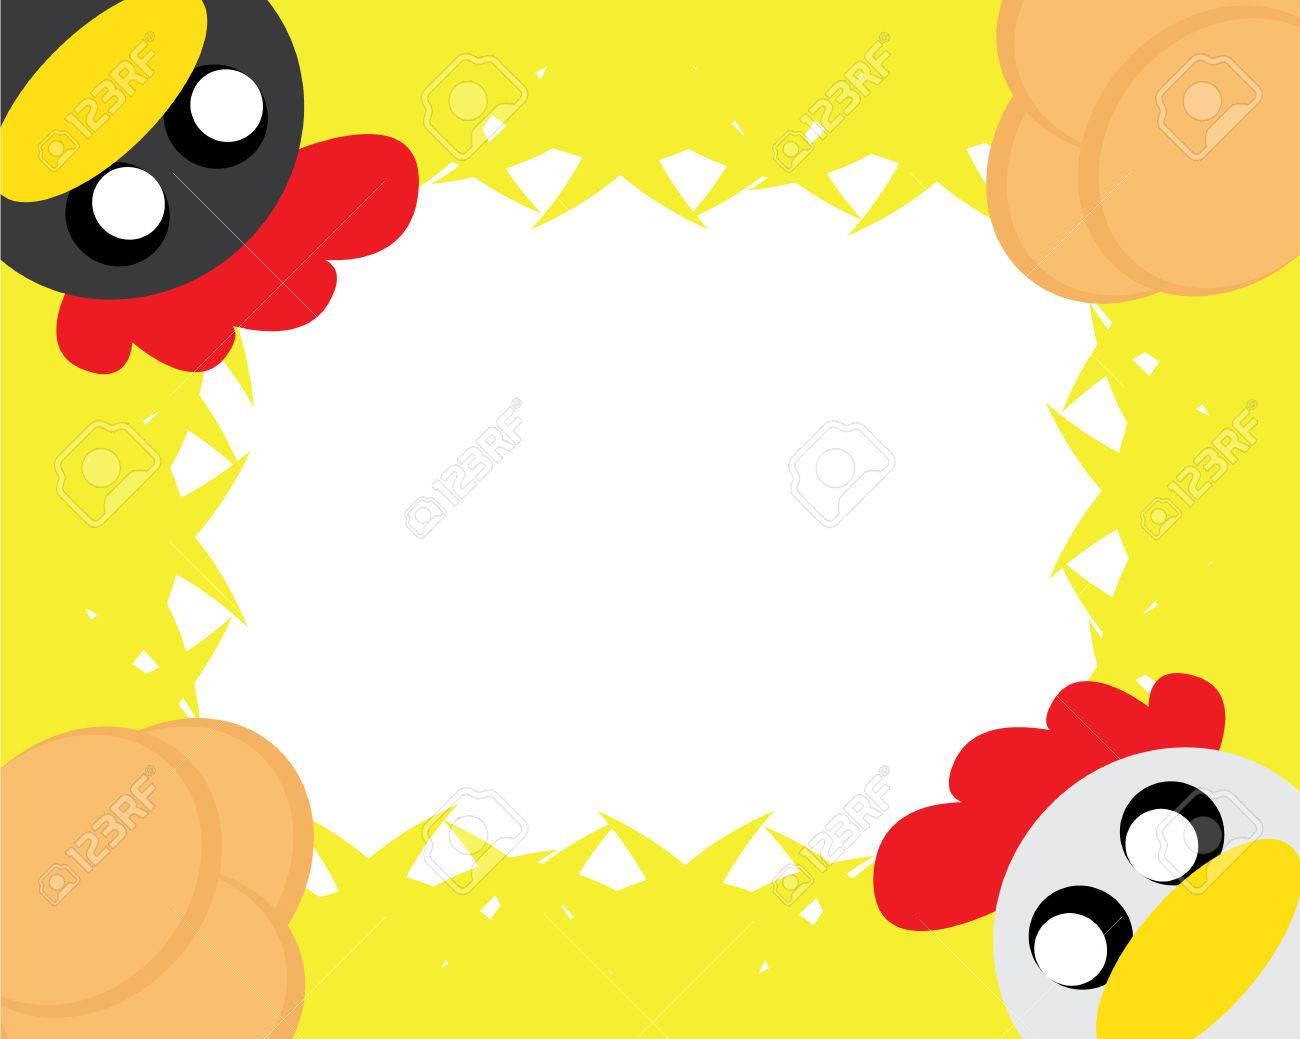 Chicken And Egg Wallpaper Royalty Svg Cliparts Vectors